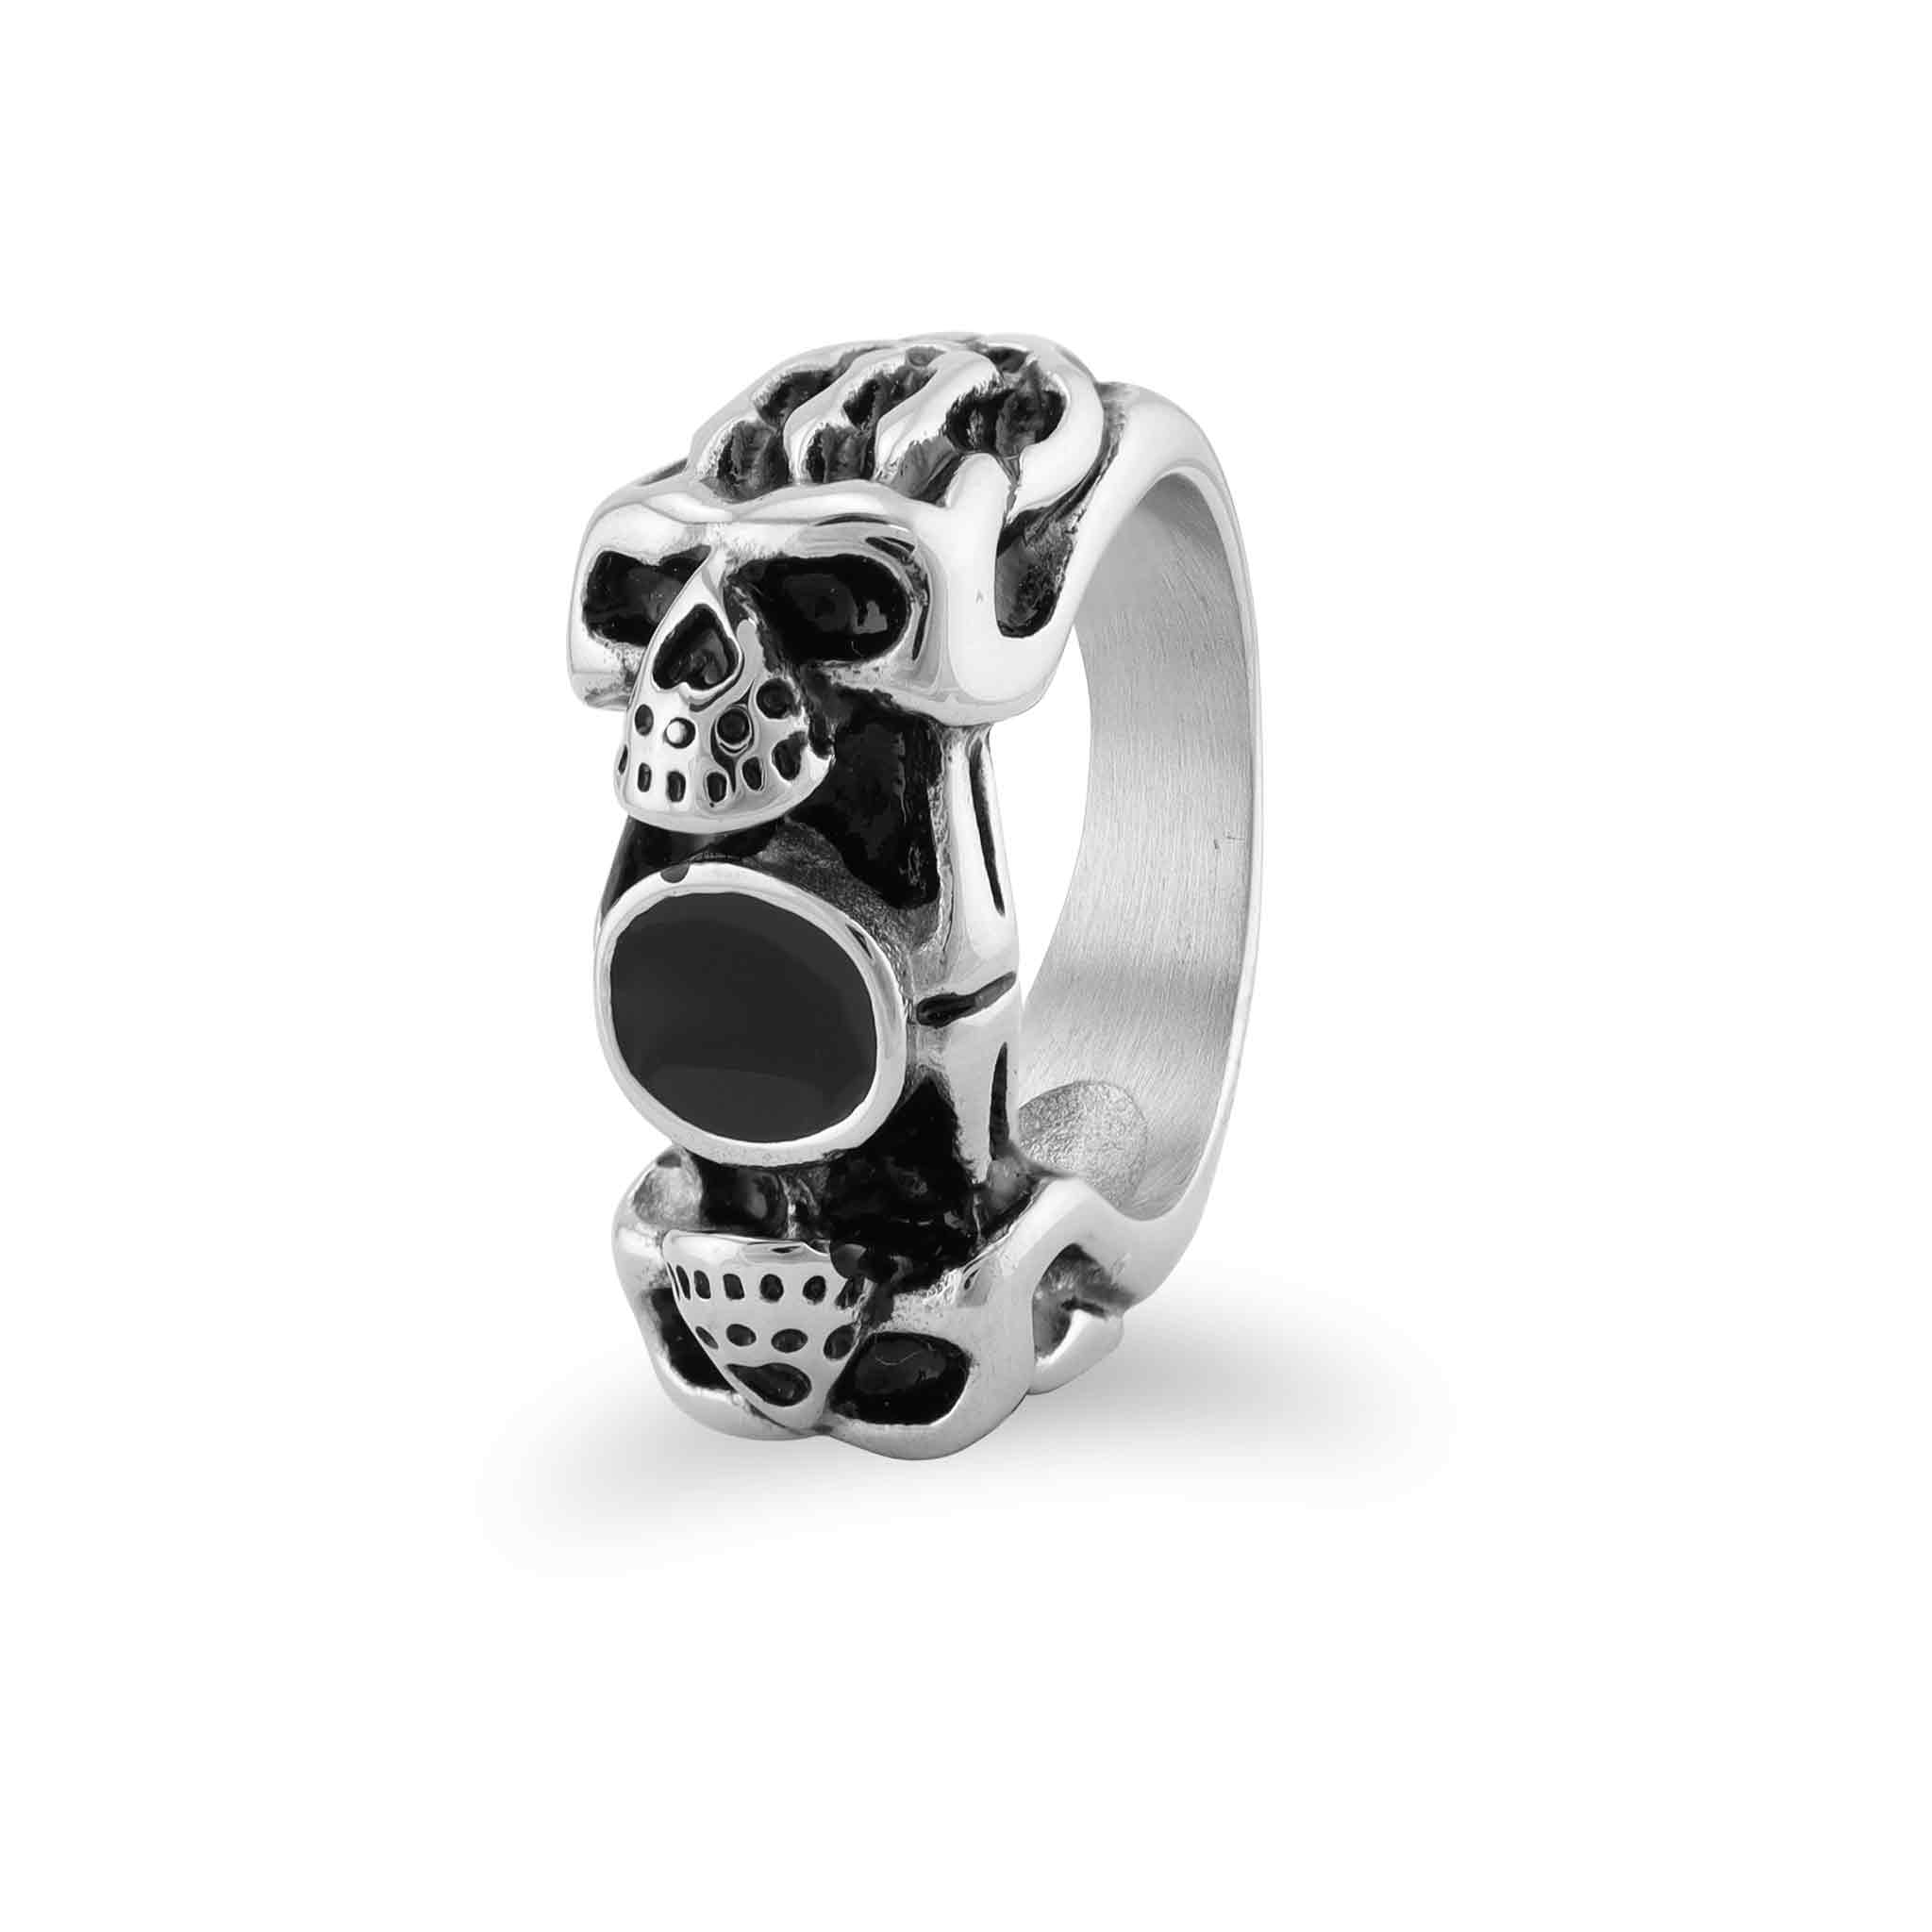 Polished Black CZ Stone Center With Skull Accents Stainless Steel Ring / SRJ2282